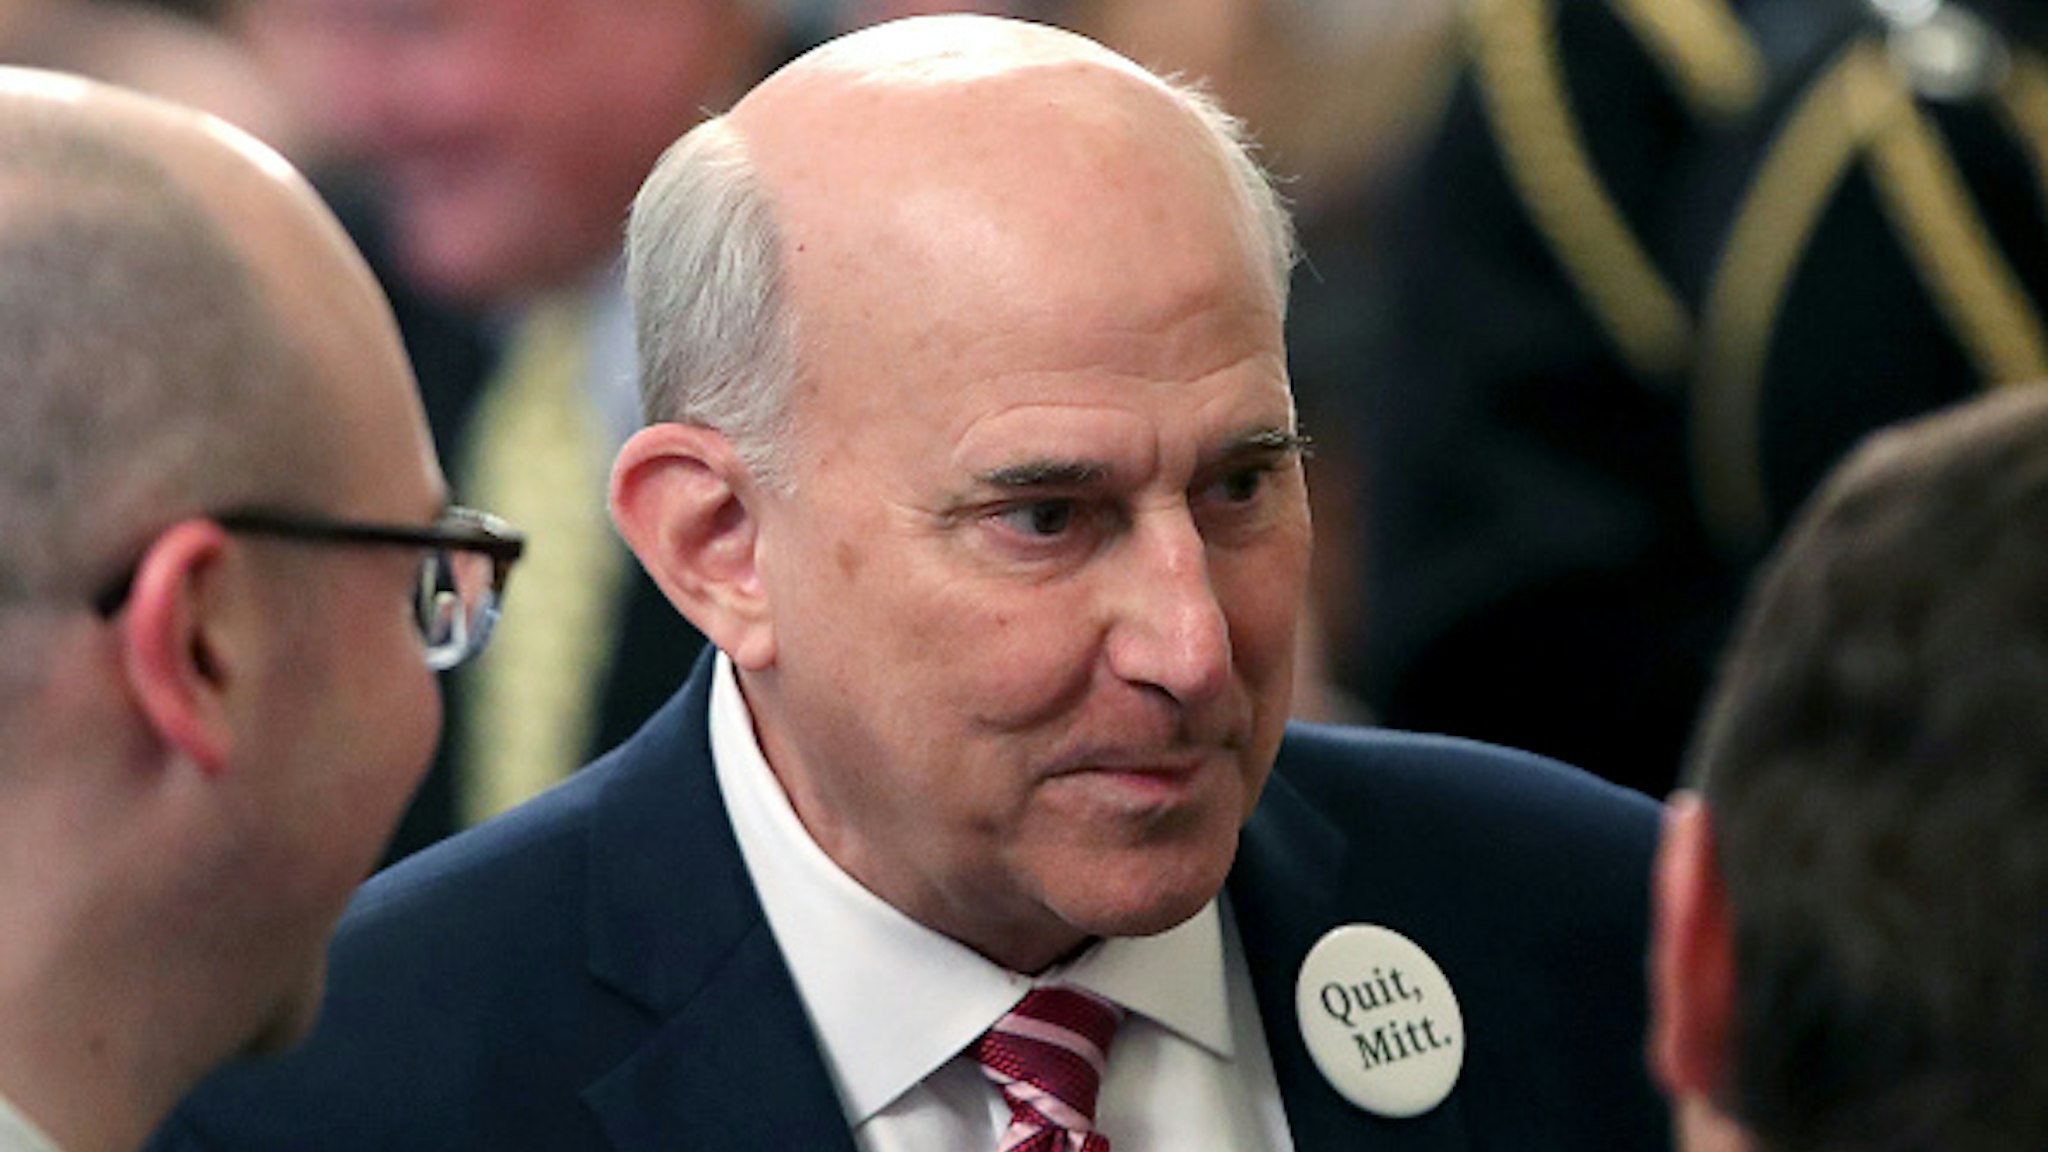 WASHINGTON, DC - FEBRUARY 06: U.S. Rep. Louie Gohmert (R-TX) waits for U.S. President Donald Trump to speak to the media, one day after the U.S. Senate acquitted on two articles of impeachment, in the East Room of the White House February 6, 2020 in Washington, DC. After five months of congressional hearings and investigations about President Trump’s dealings with Ukraine, the U.S. Senate formally acquitted the president of charges that he abused his power and obstructed Congress.